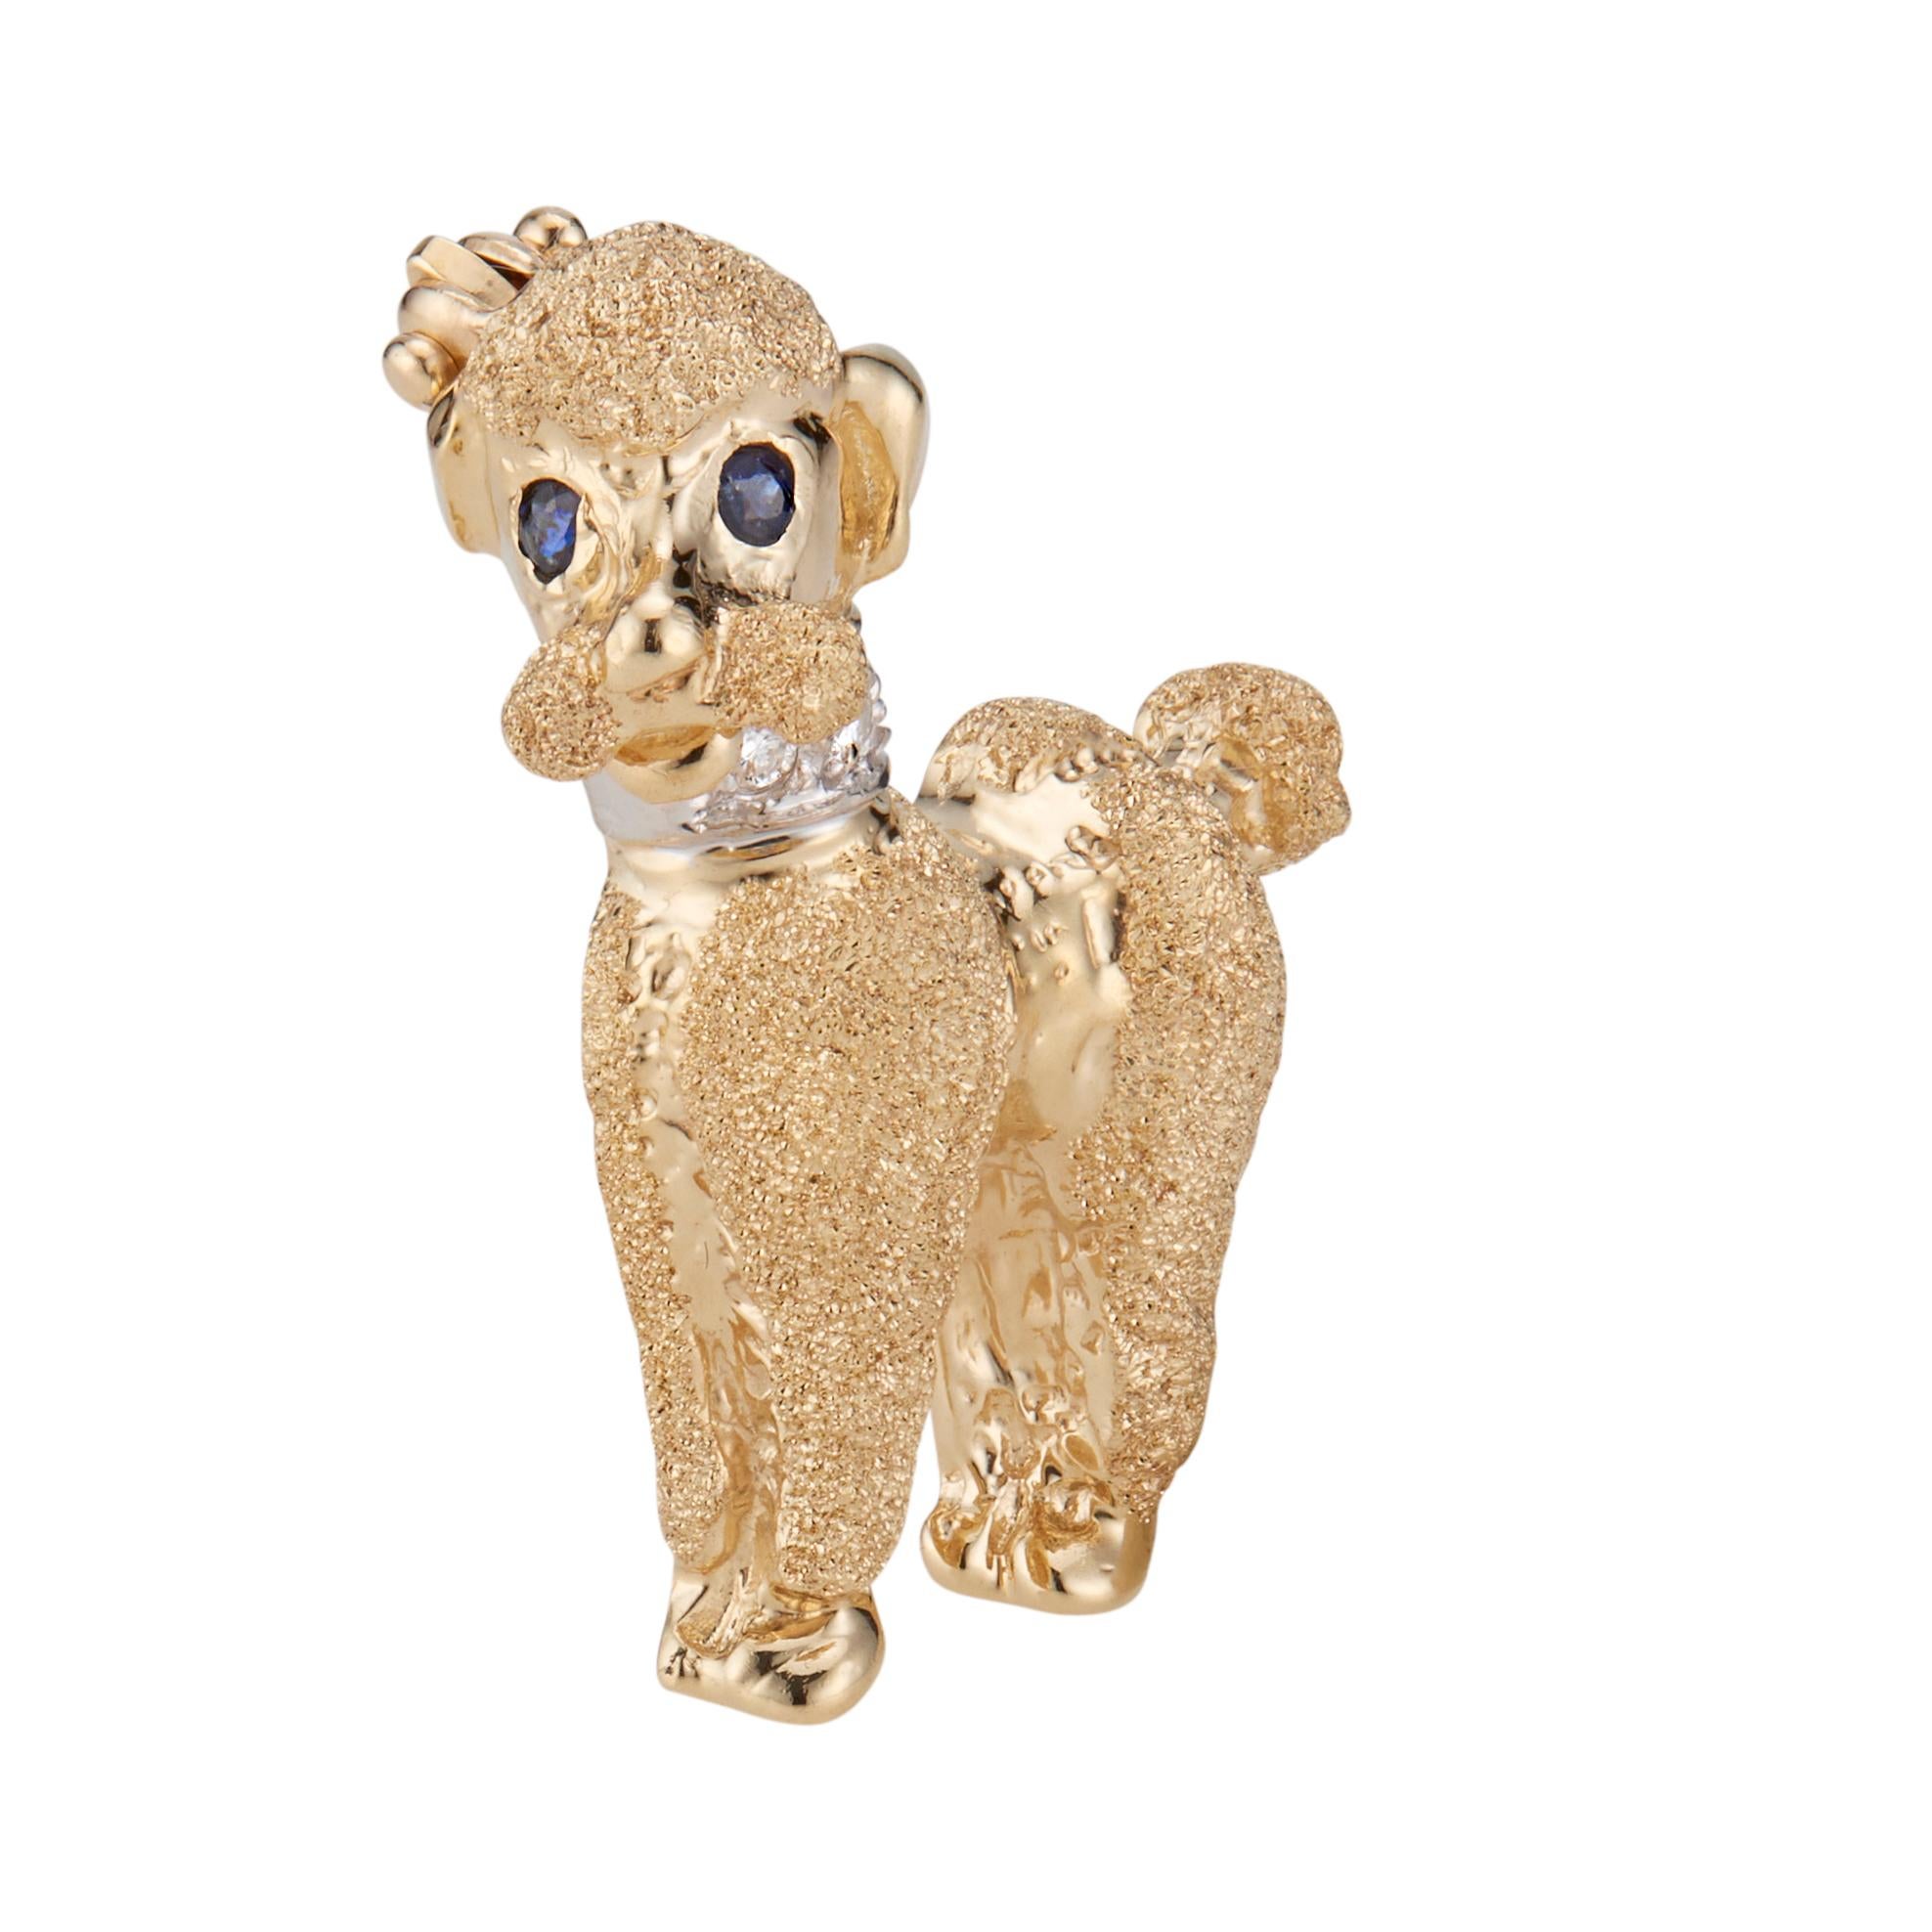 1960's Poodle brooch. Round Sapphire yes with diamond white gold collar, set in 14k gold. 

3 round full cut Diamonds, approx. total weight .03cts, H, SI
2 round blue Sapphires, approx. total weight .02cts
14k yellow gold 
14k white gold 
Tested and